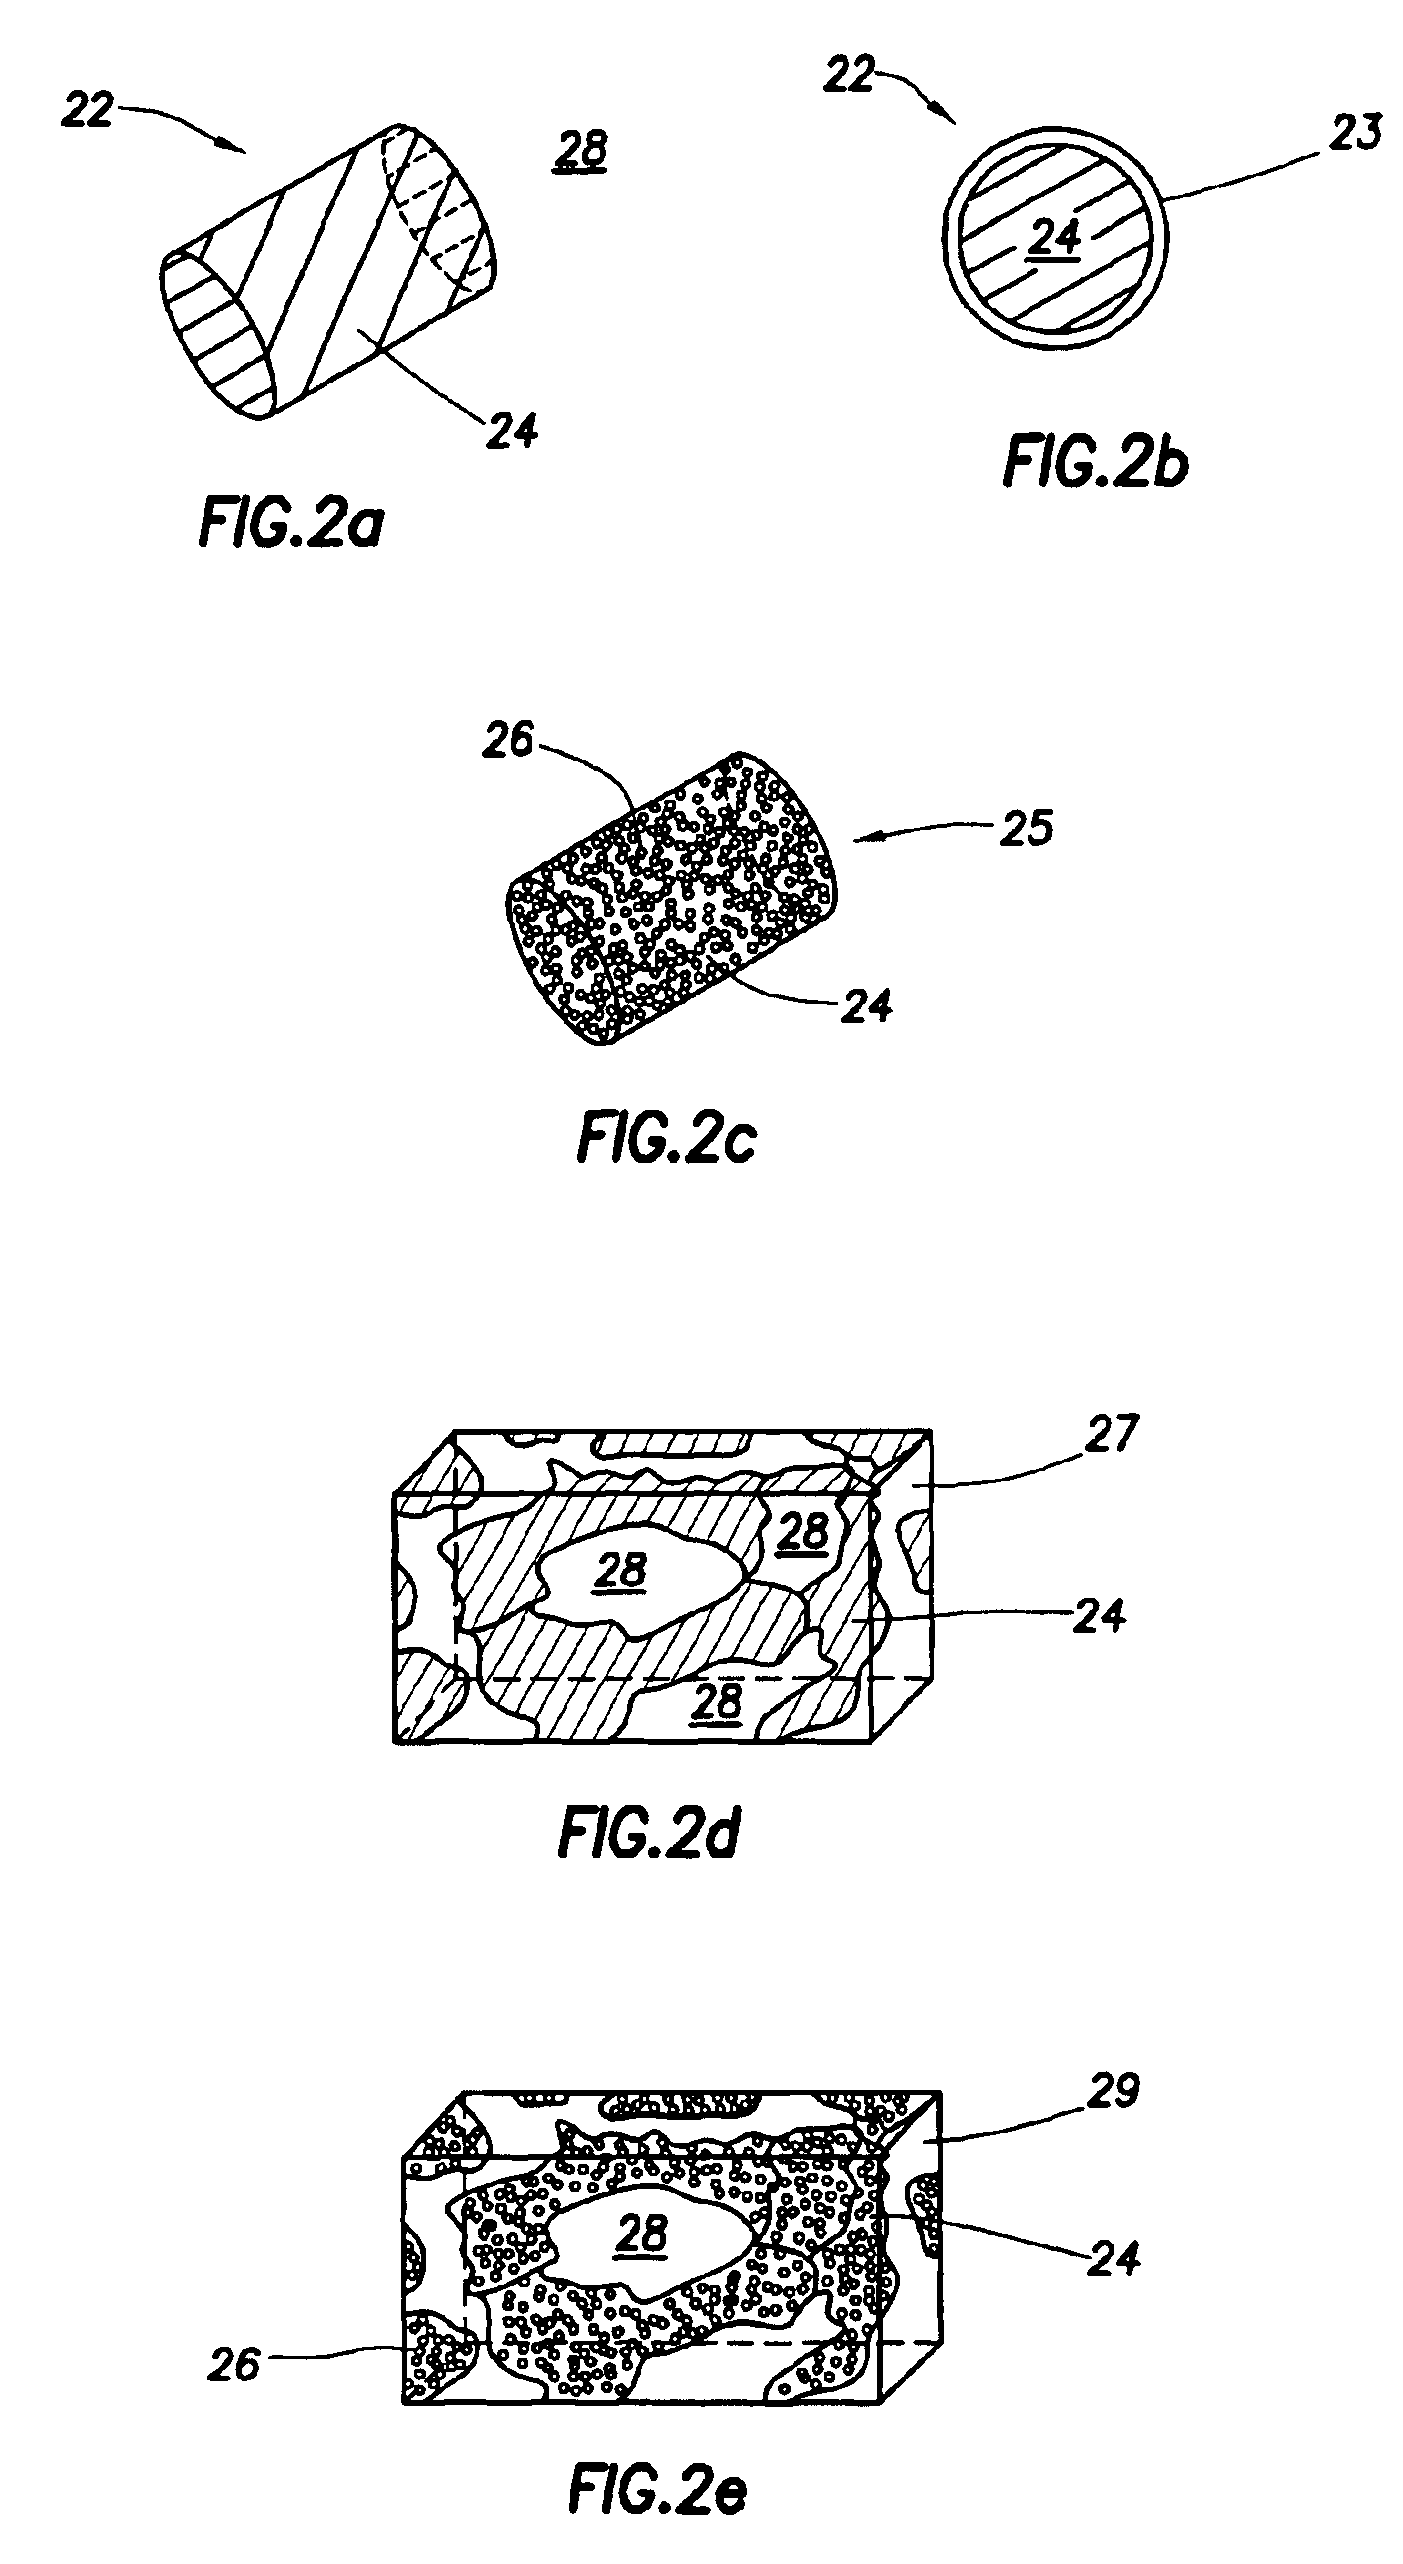 Method and materials for hydraulic fracturing of wells